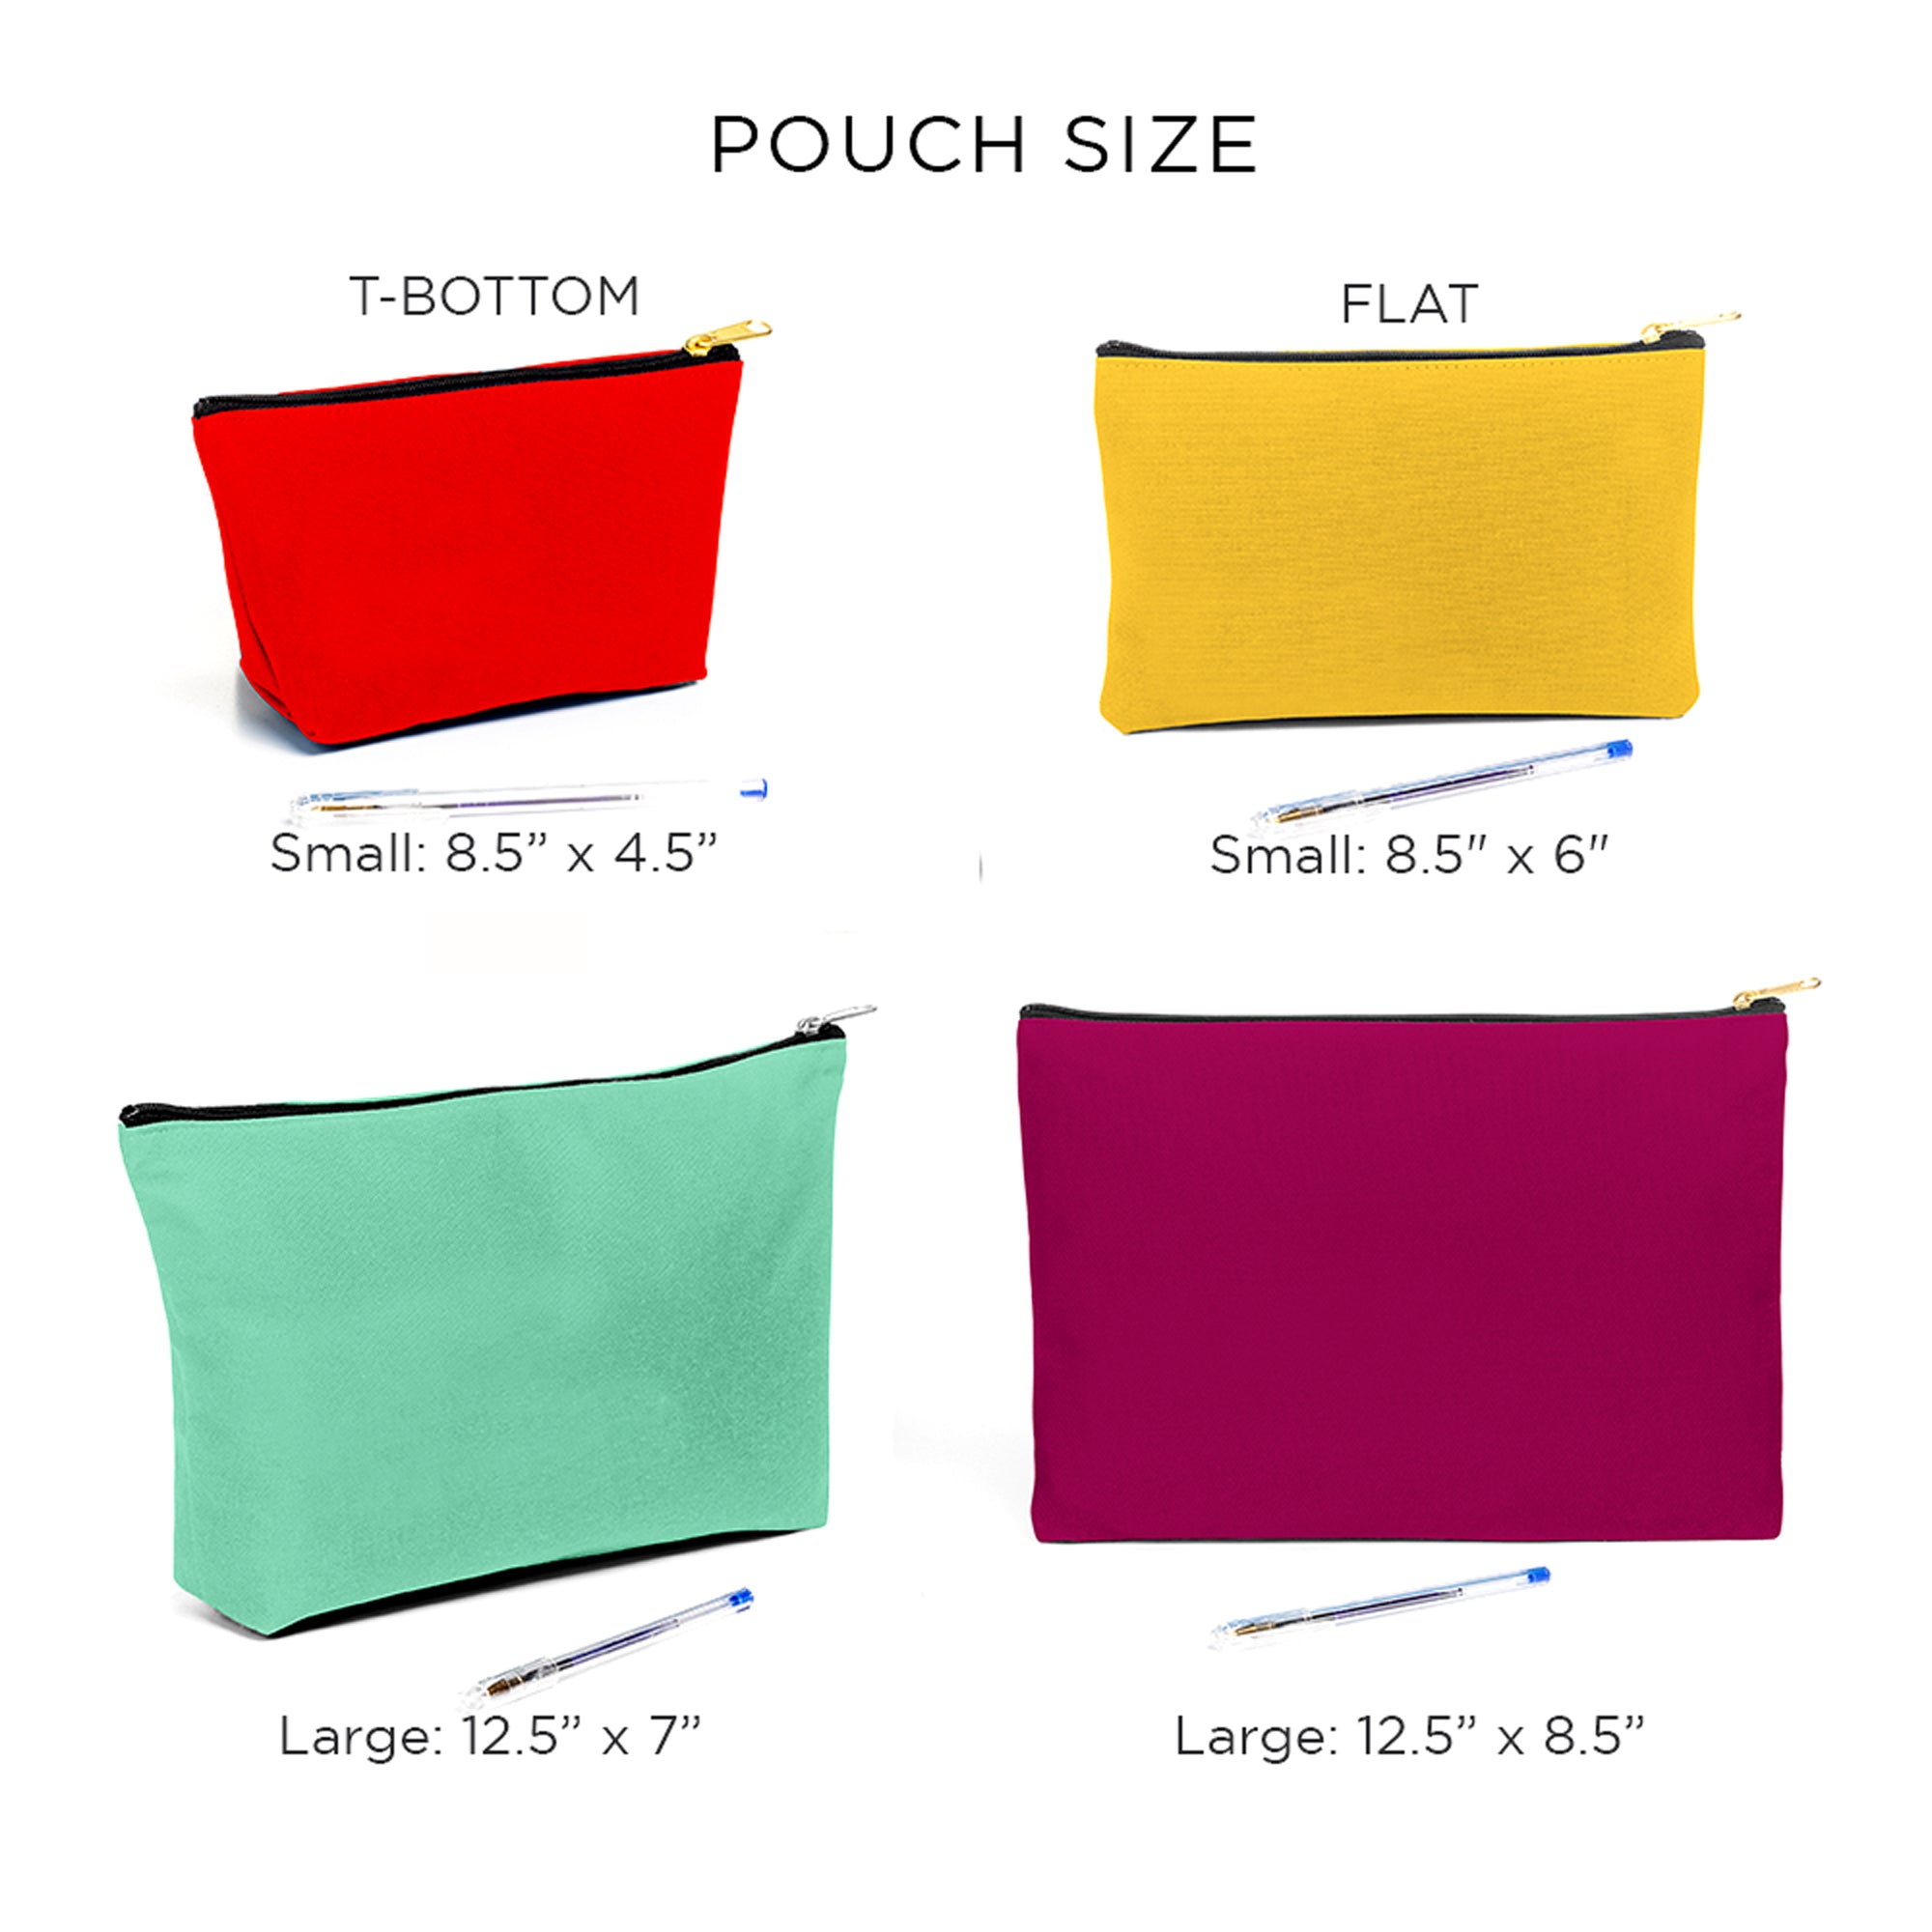 Dirty (No Need To Smell) Travel Accessory Pouch